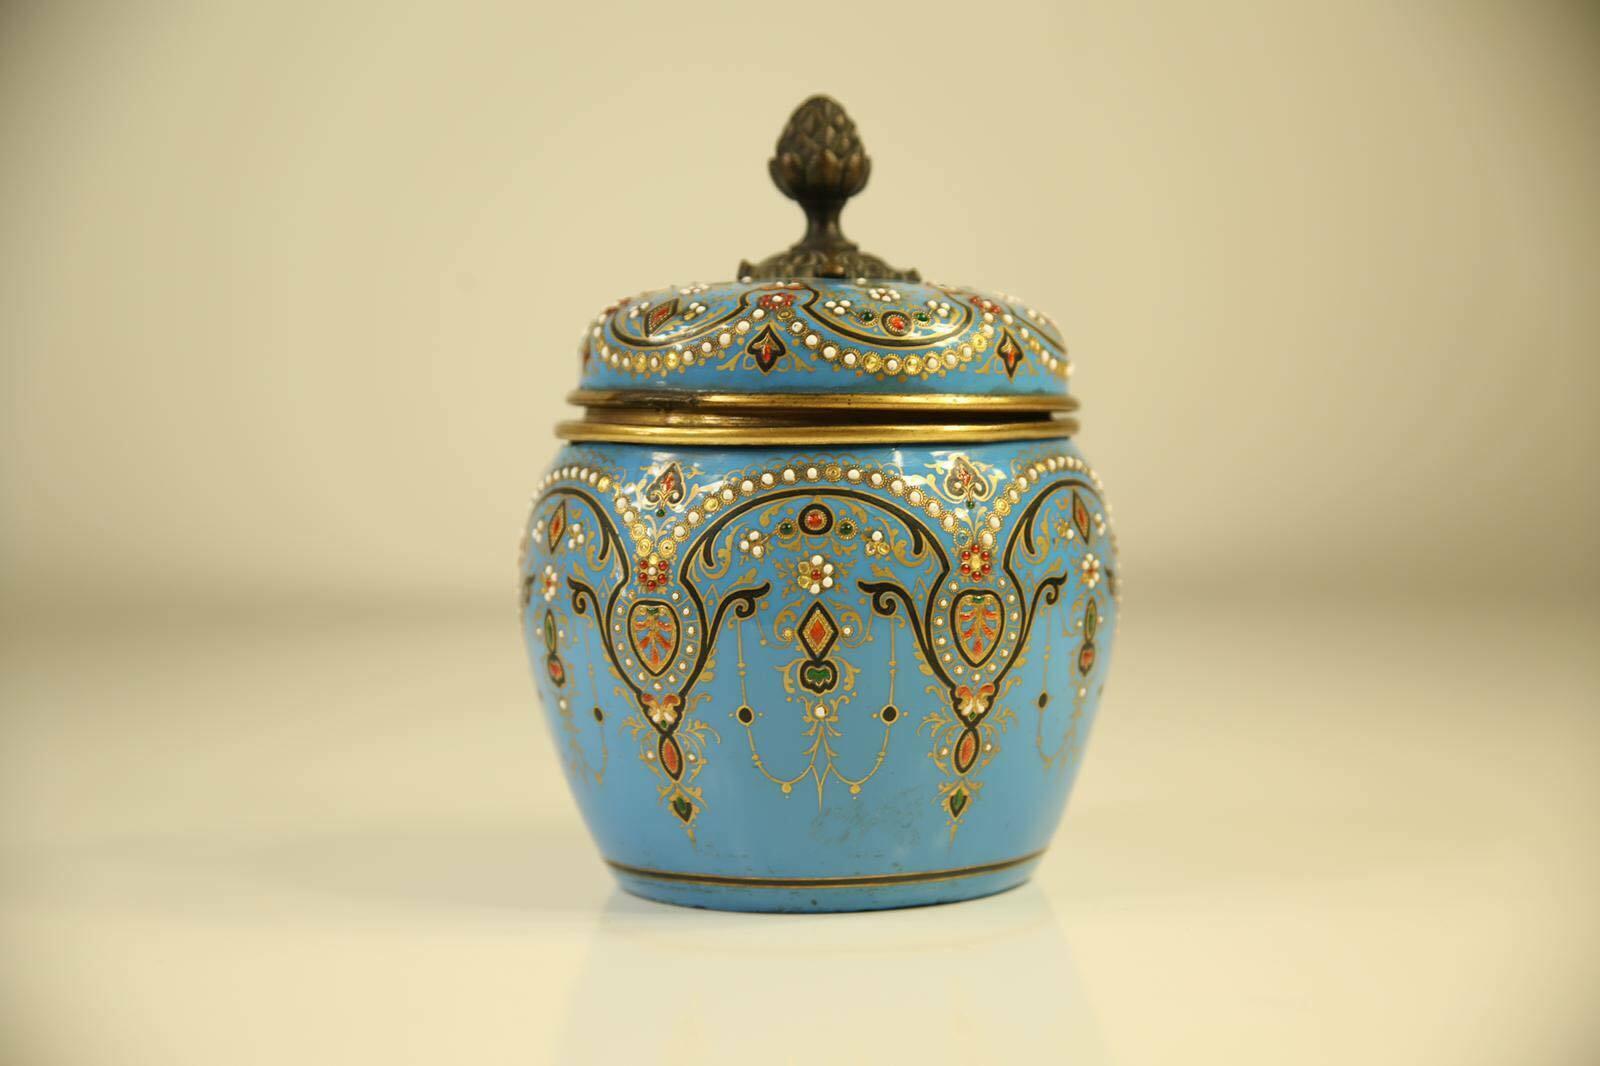 French Jeweled Turquoise Enamel Jar Scent Bottles Perfume, 19th Century  For Sale 2